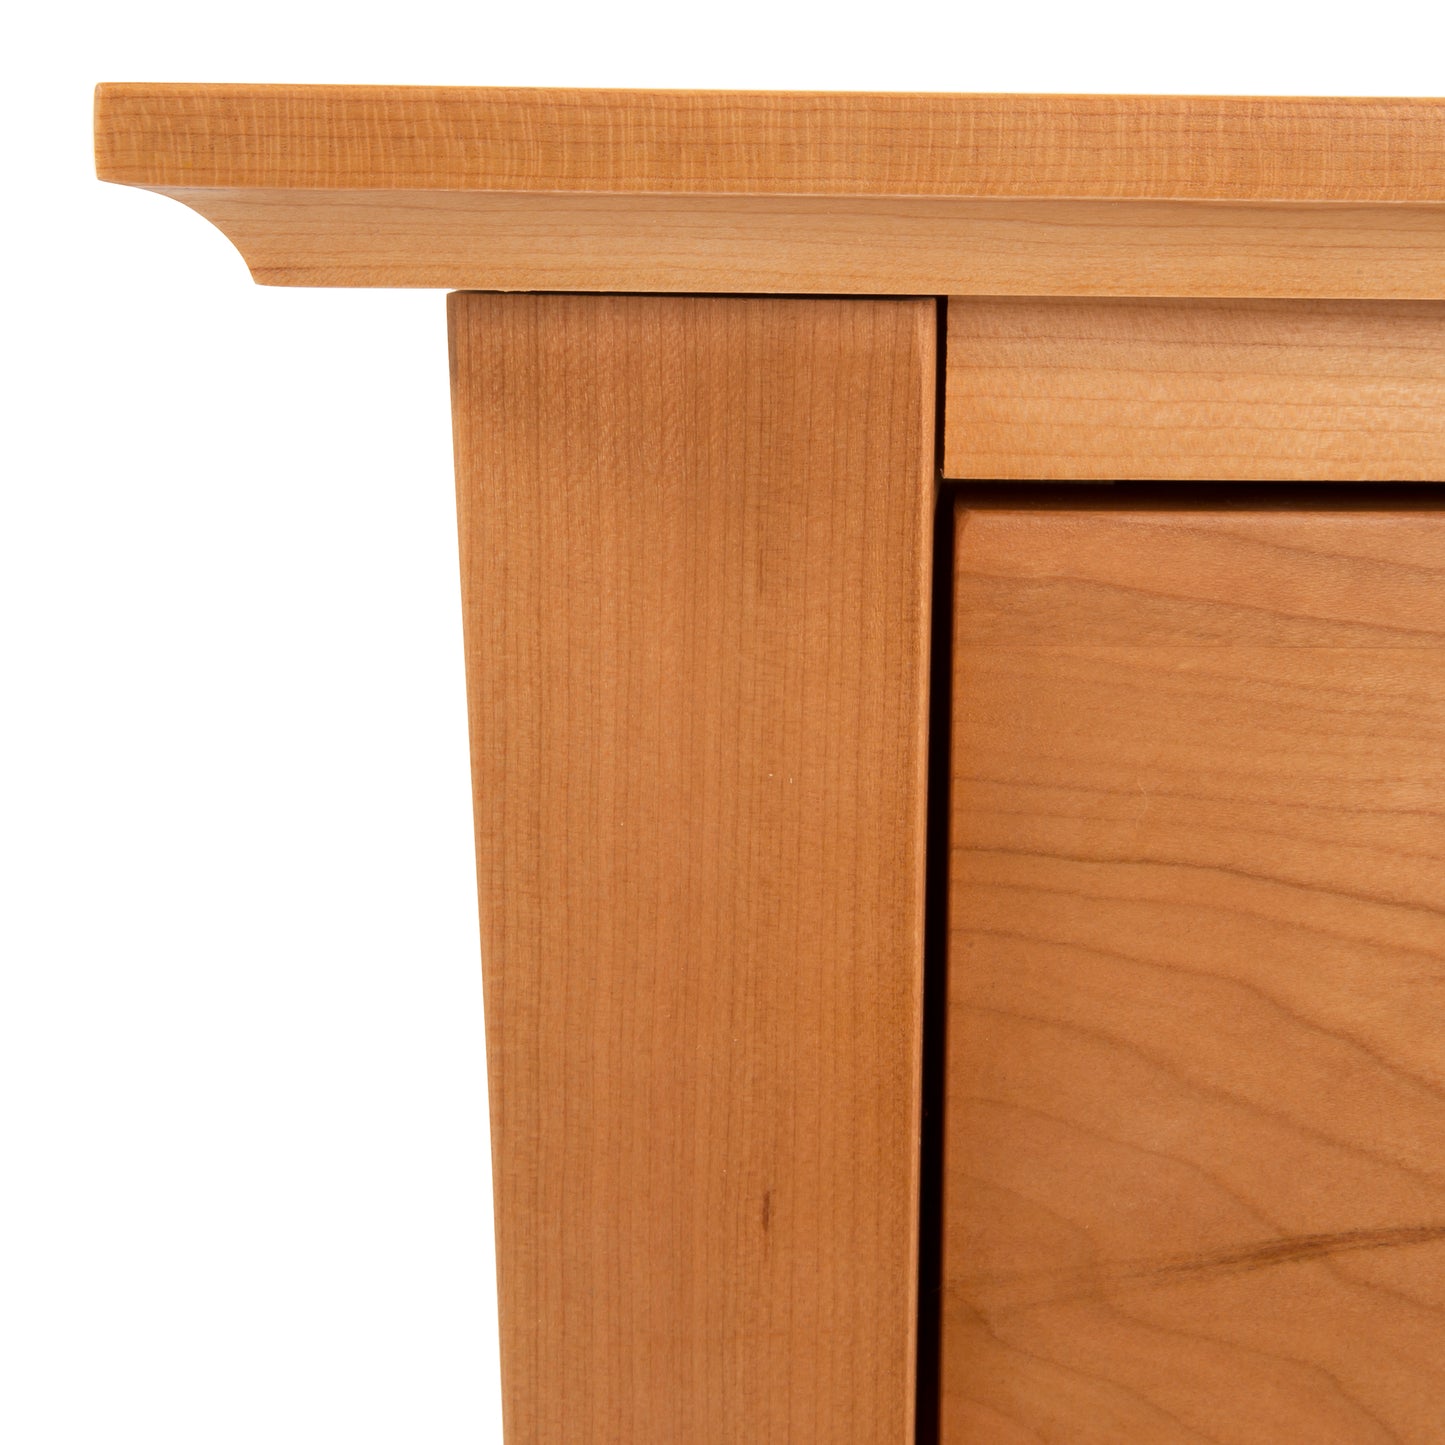 A close up view of a Lyndon Furniture Green Mountain 1-Drawer Open Shelf Nightstand.